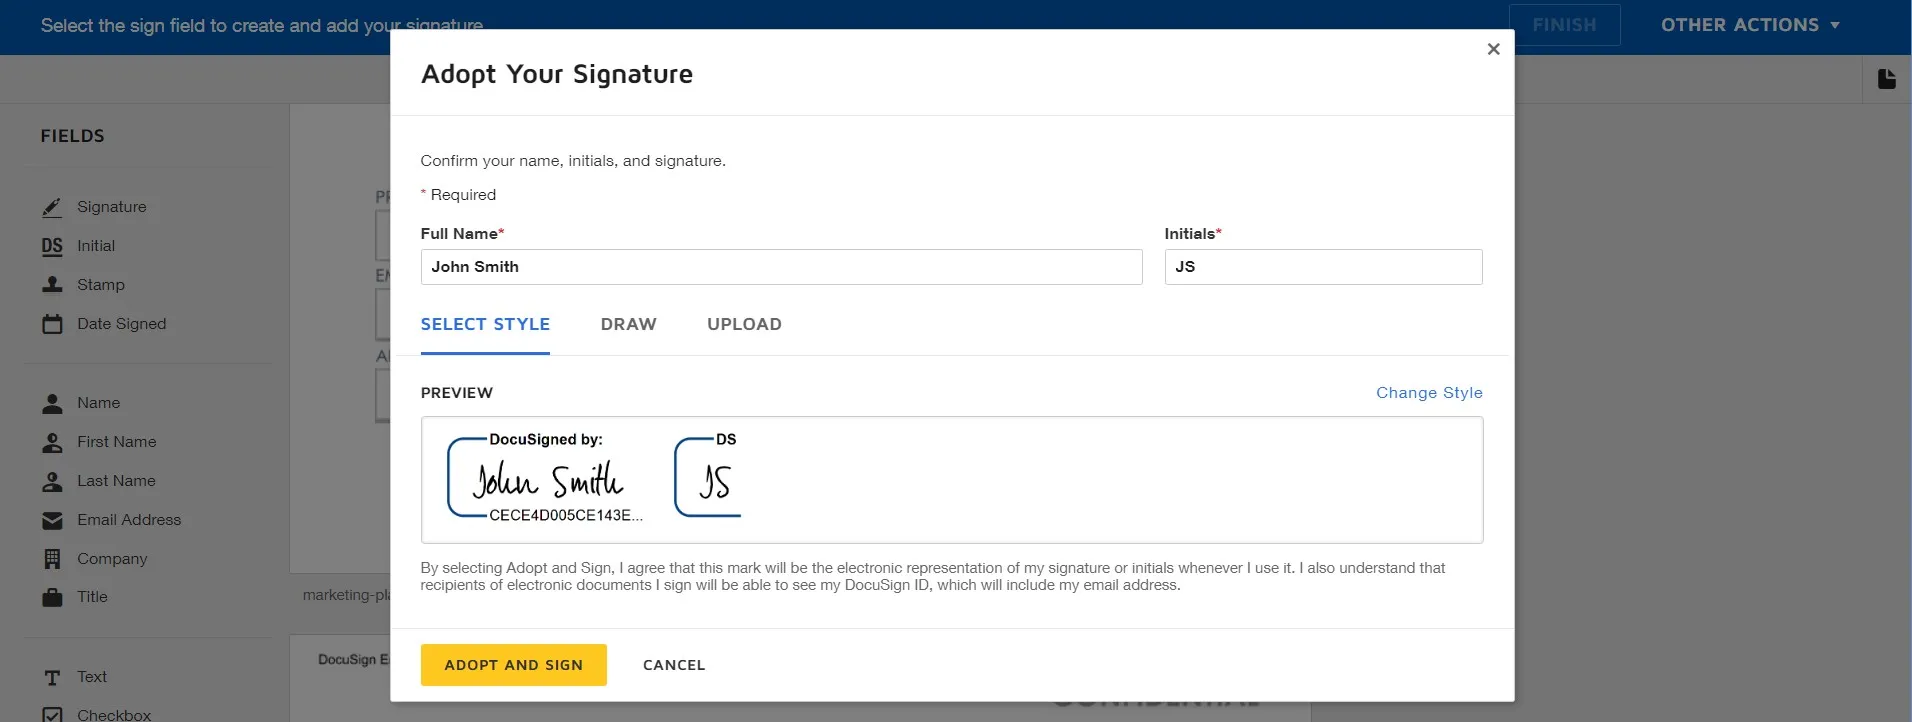 how to docusign a pdf adopt and sign